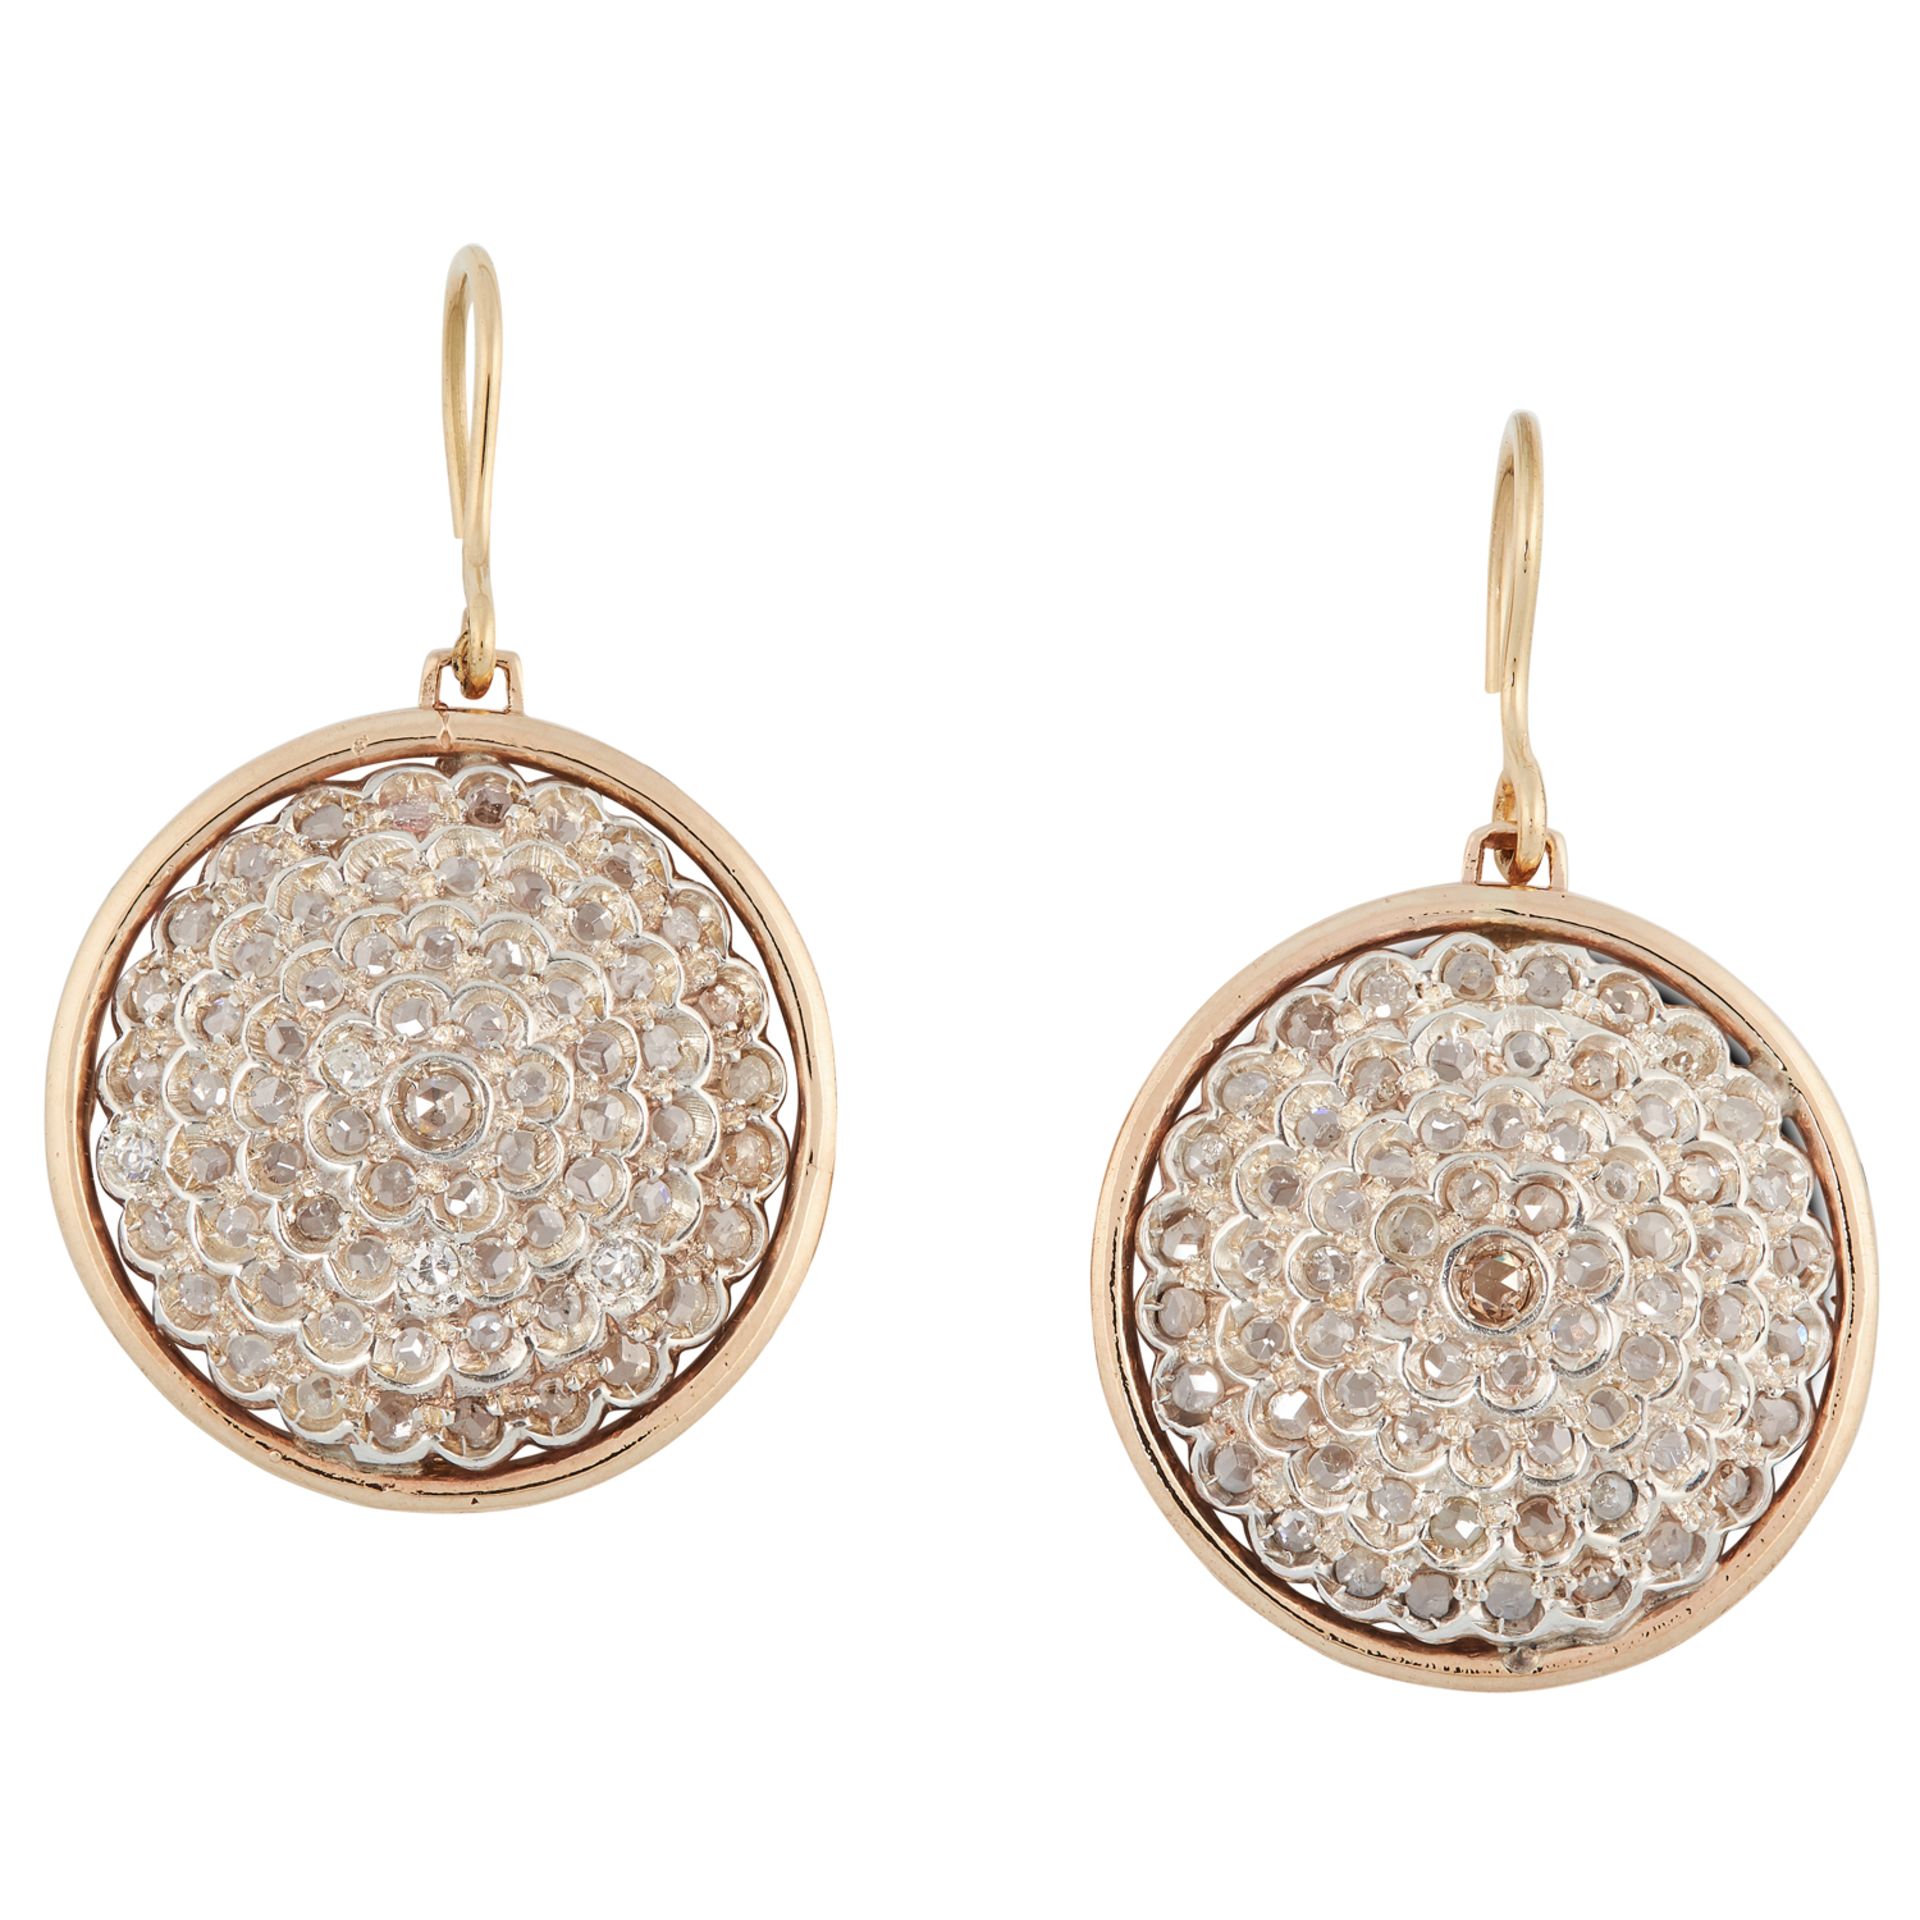 A PAIR OF DIAMOND MEDULA EARRINGS the circular face of each is pave set with rose cut diamonds, 4.